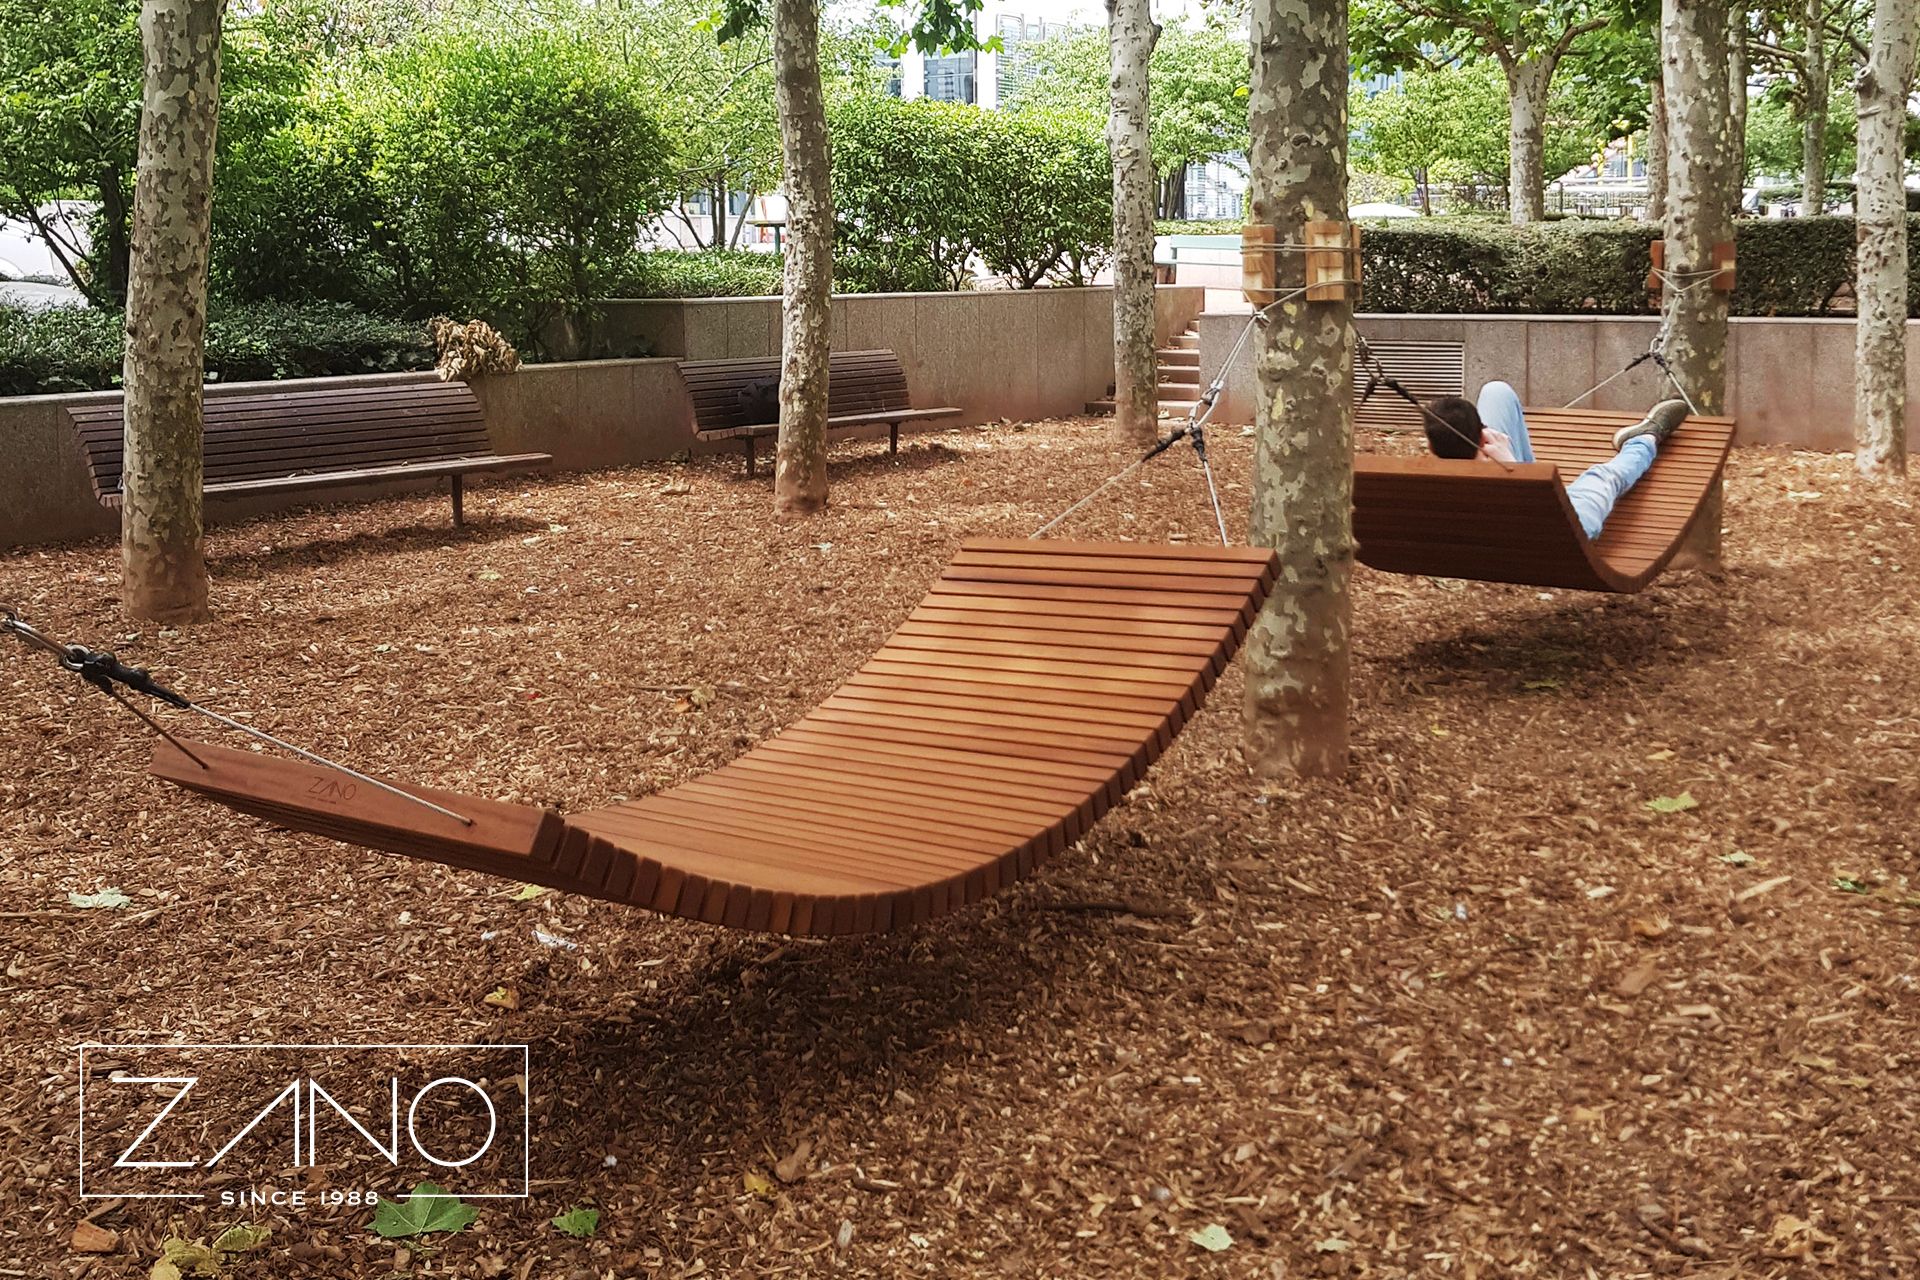 Urban and garden hammock made of stainless steel and hardwood